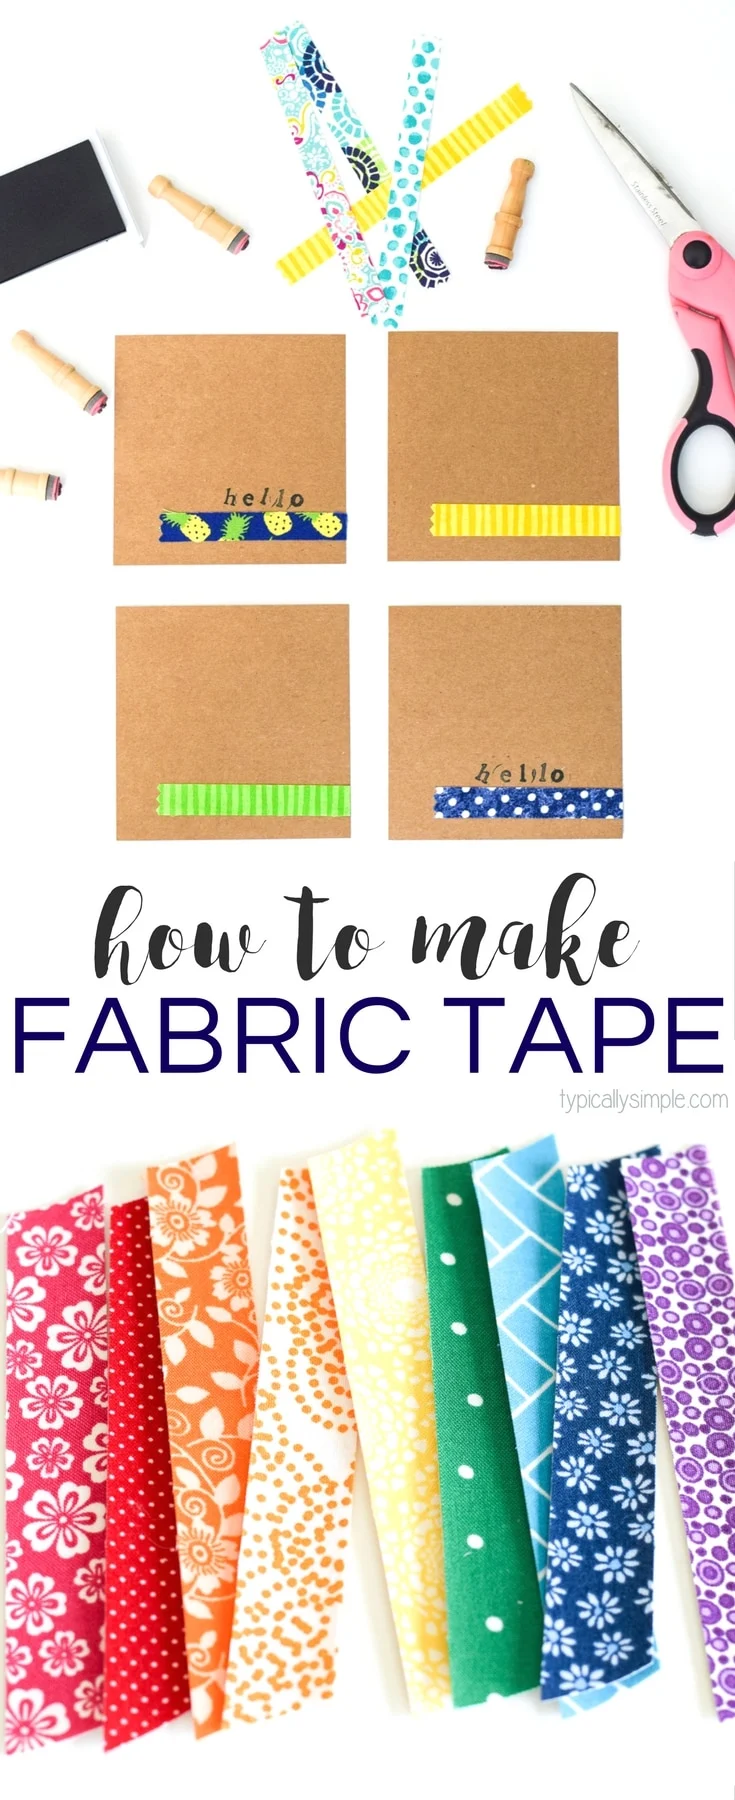 DIY Fabric Tape Tutorial - Typically Simple